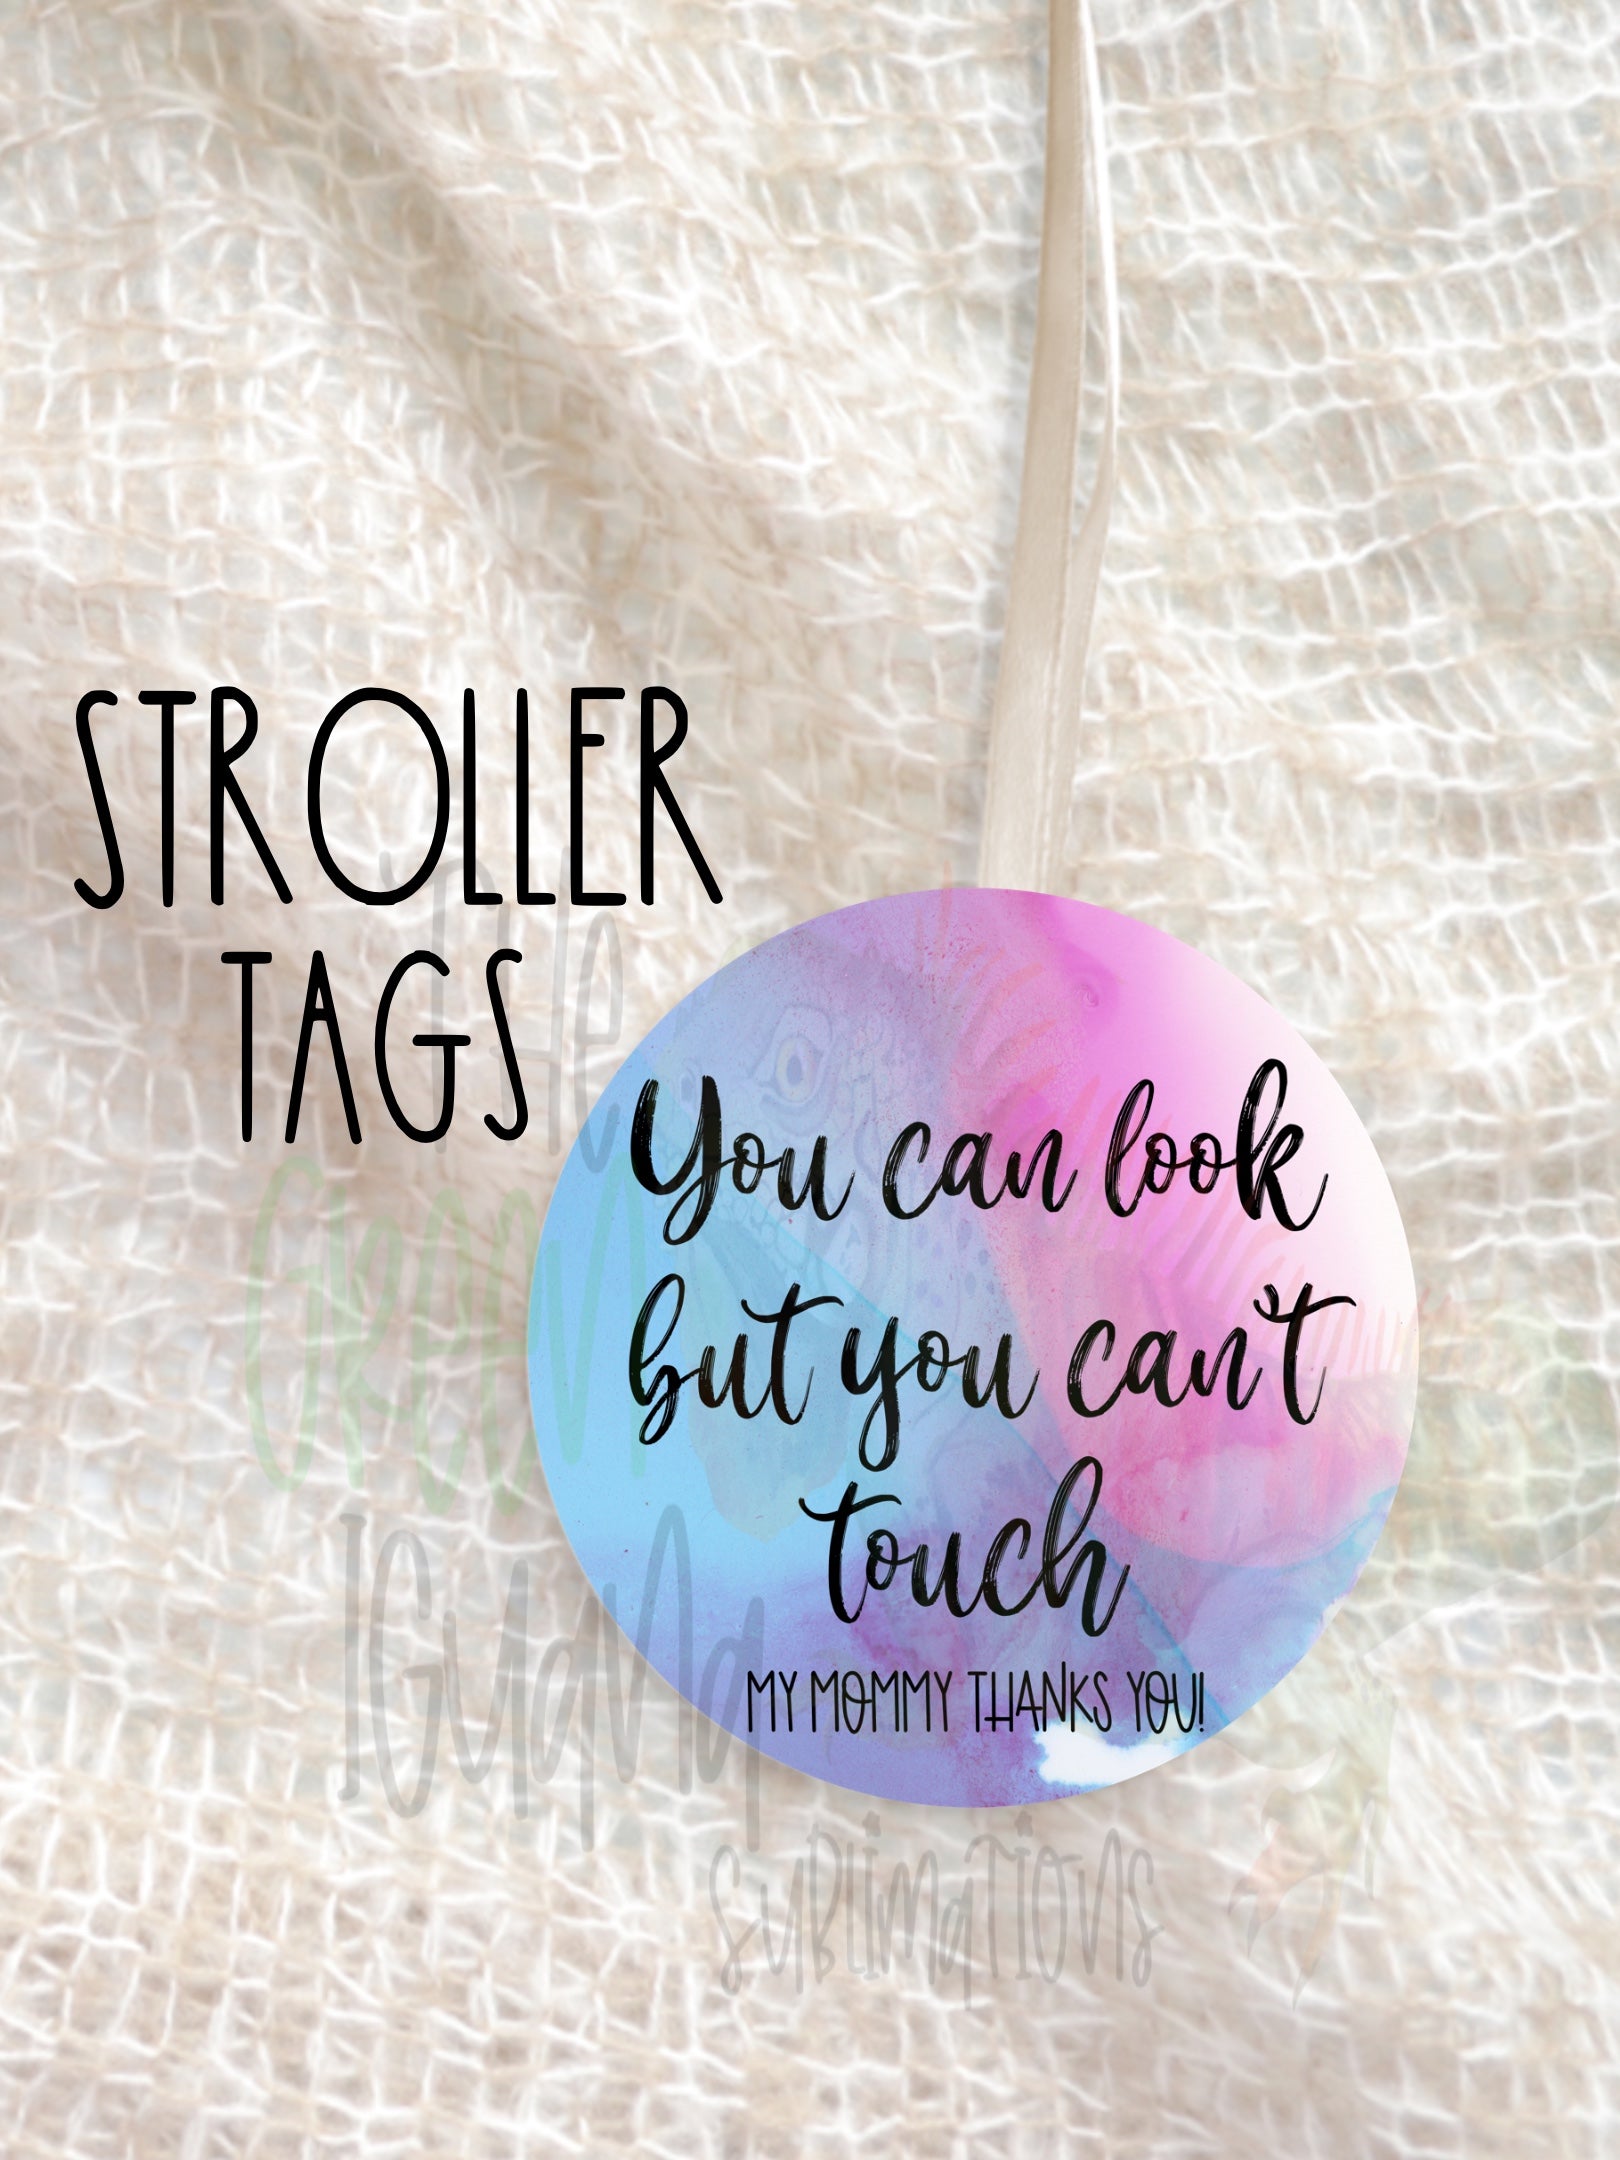 You can look, but you can’t touch - Stroller tag